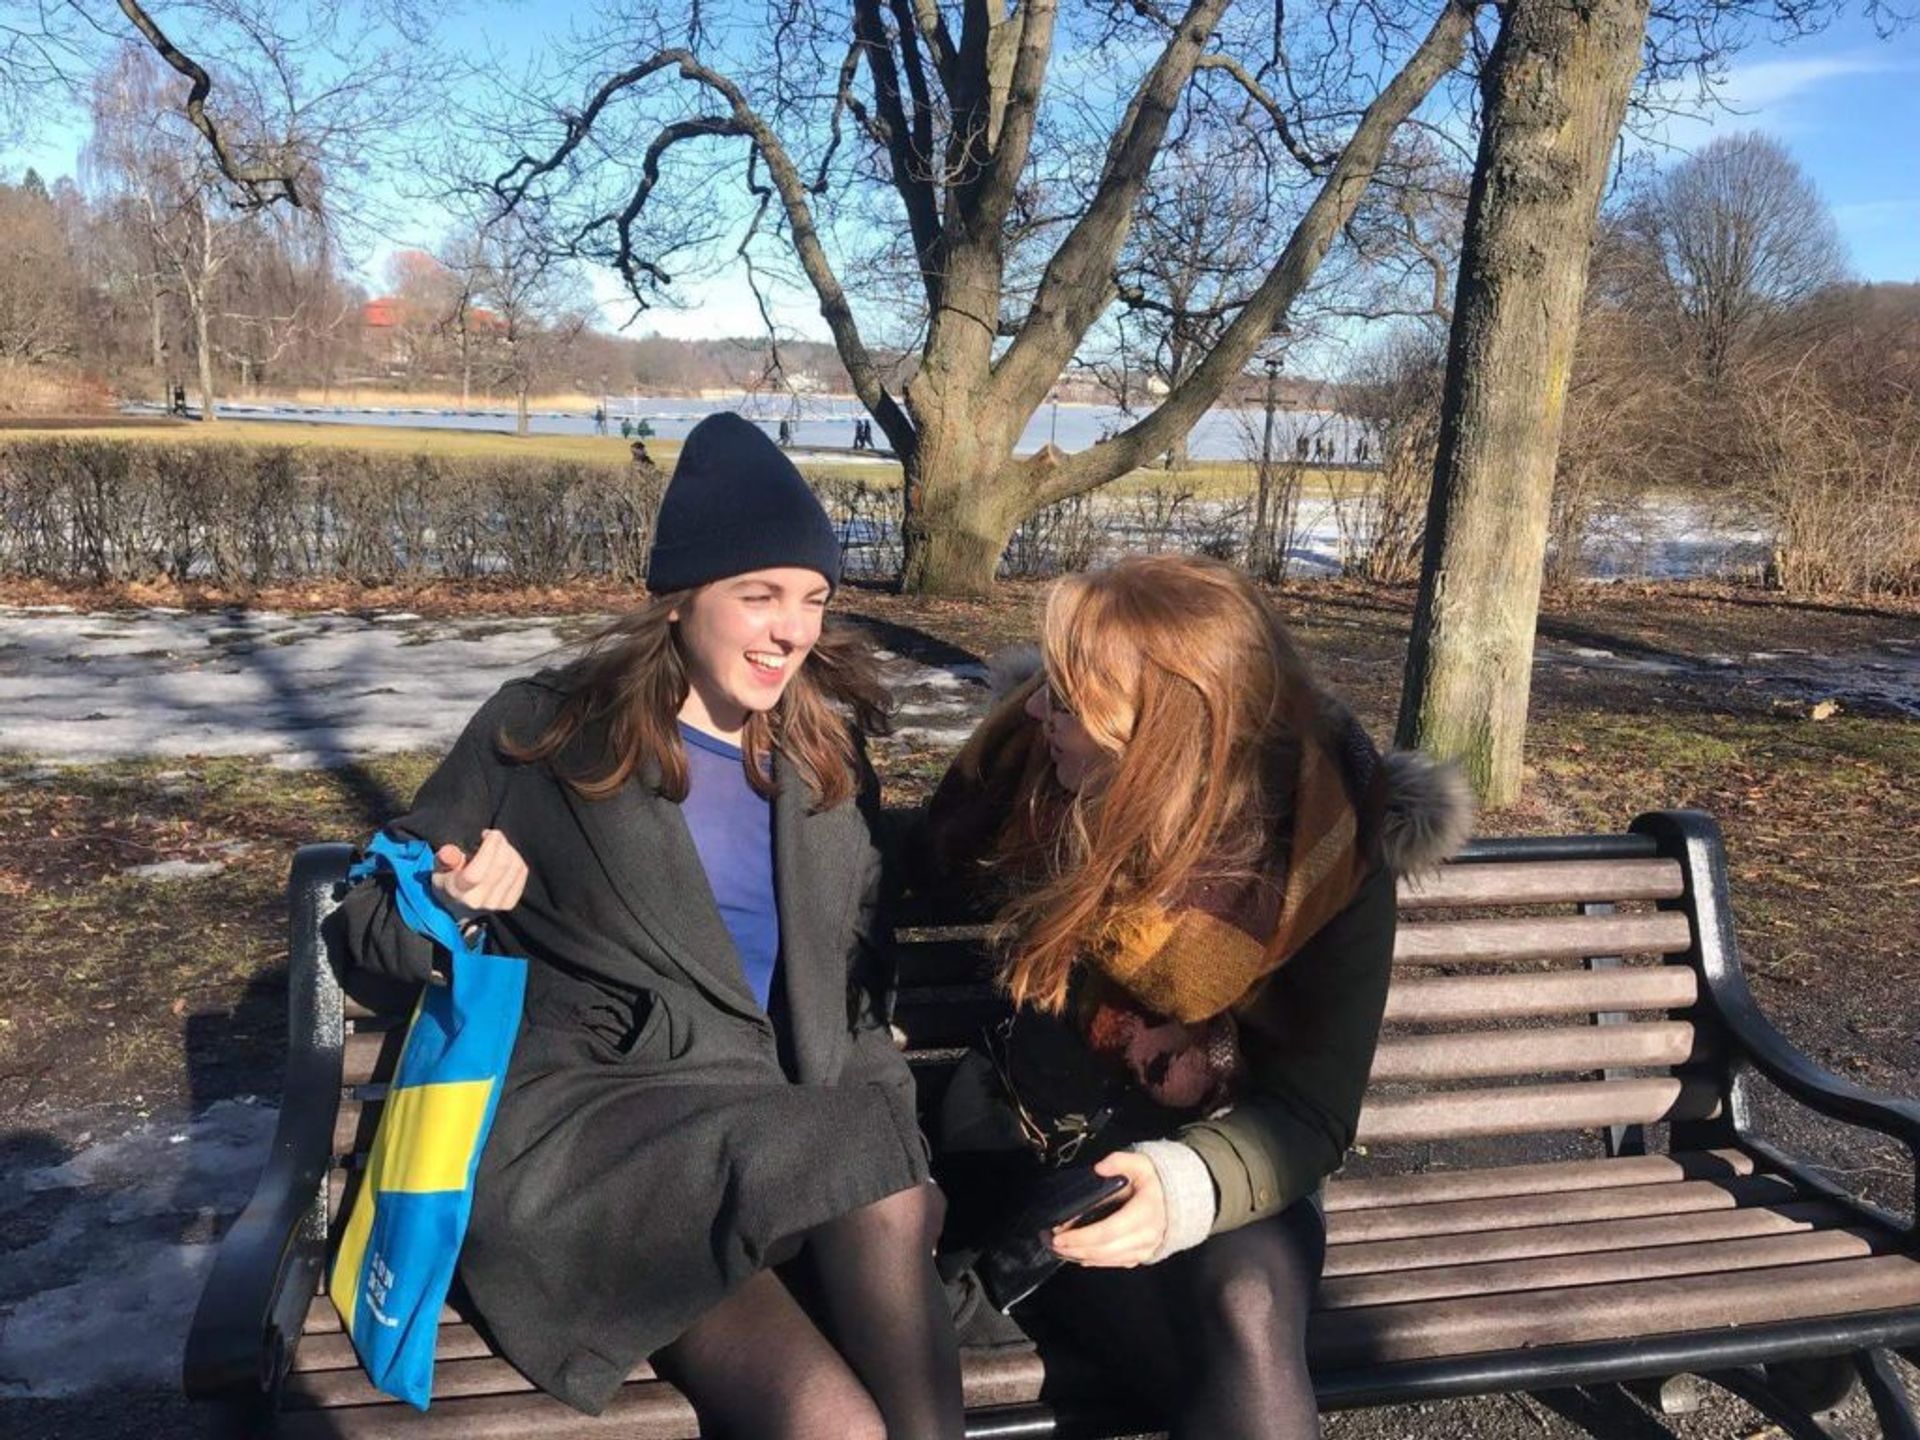 friends on a bench in the sun